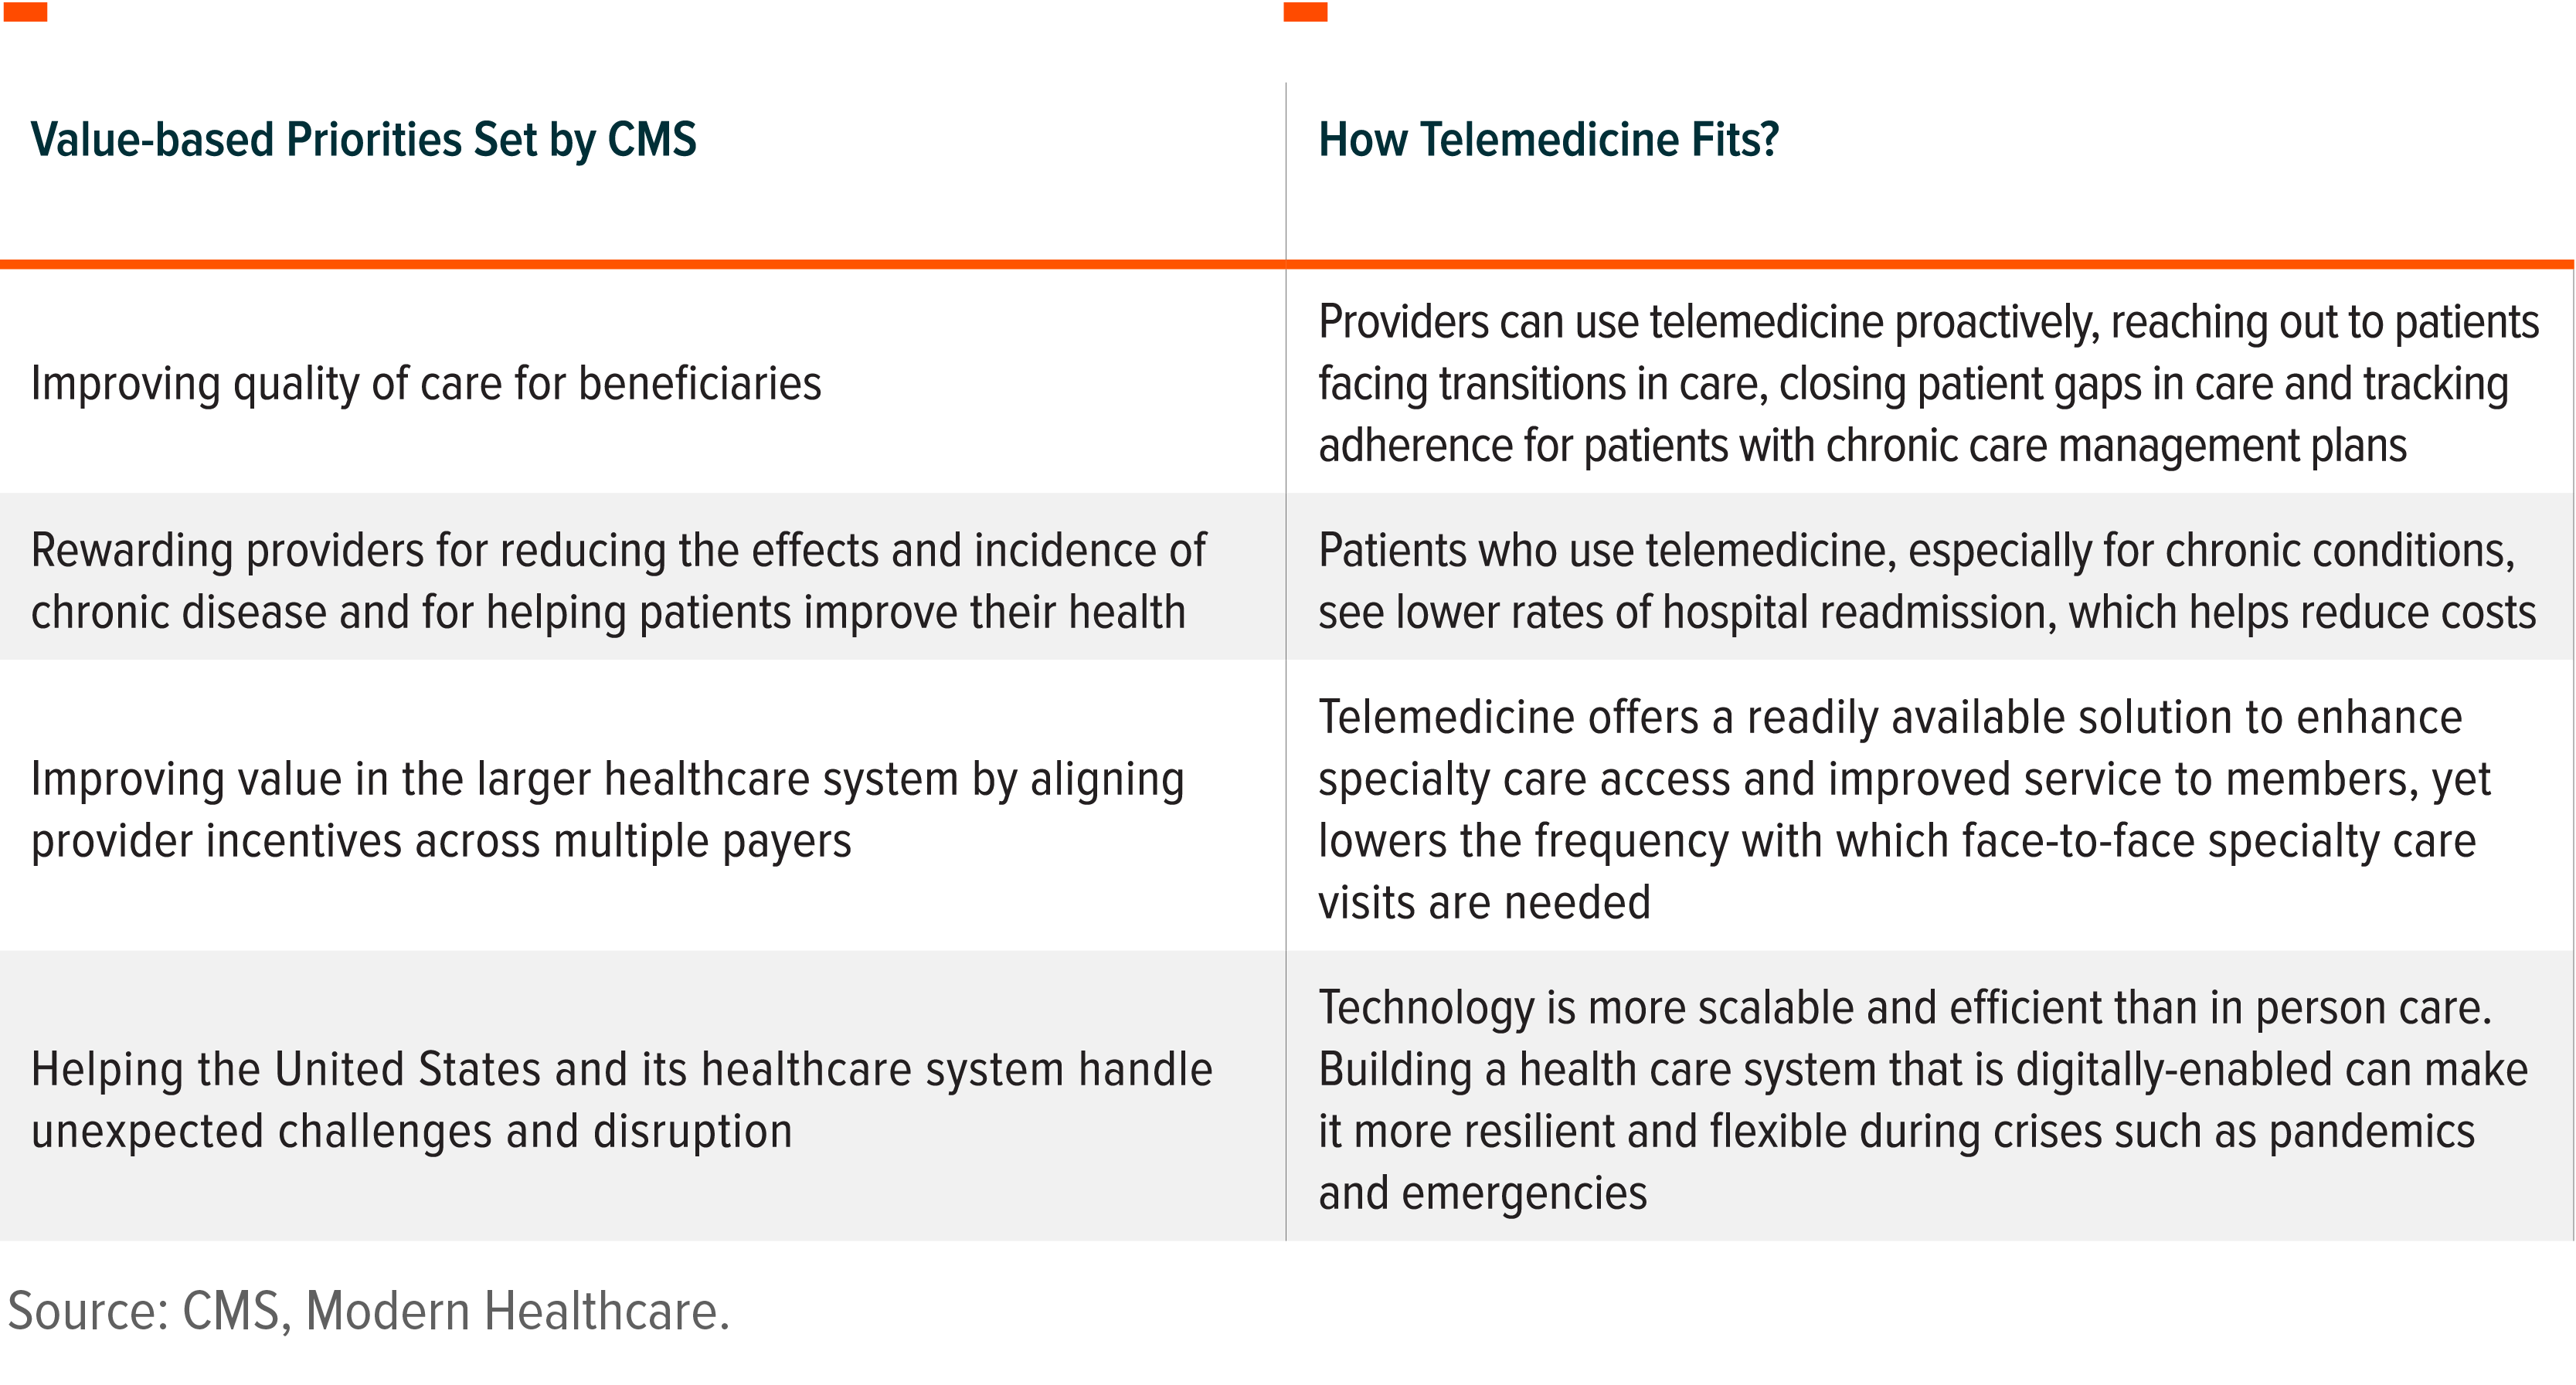 Value-based priorities set by CMS align with telemedicine